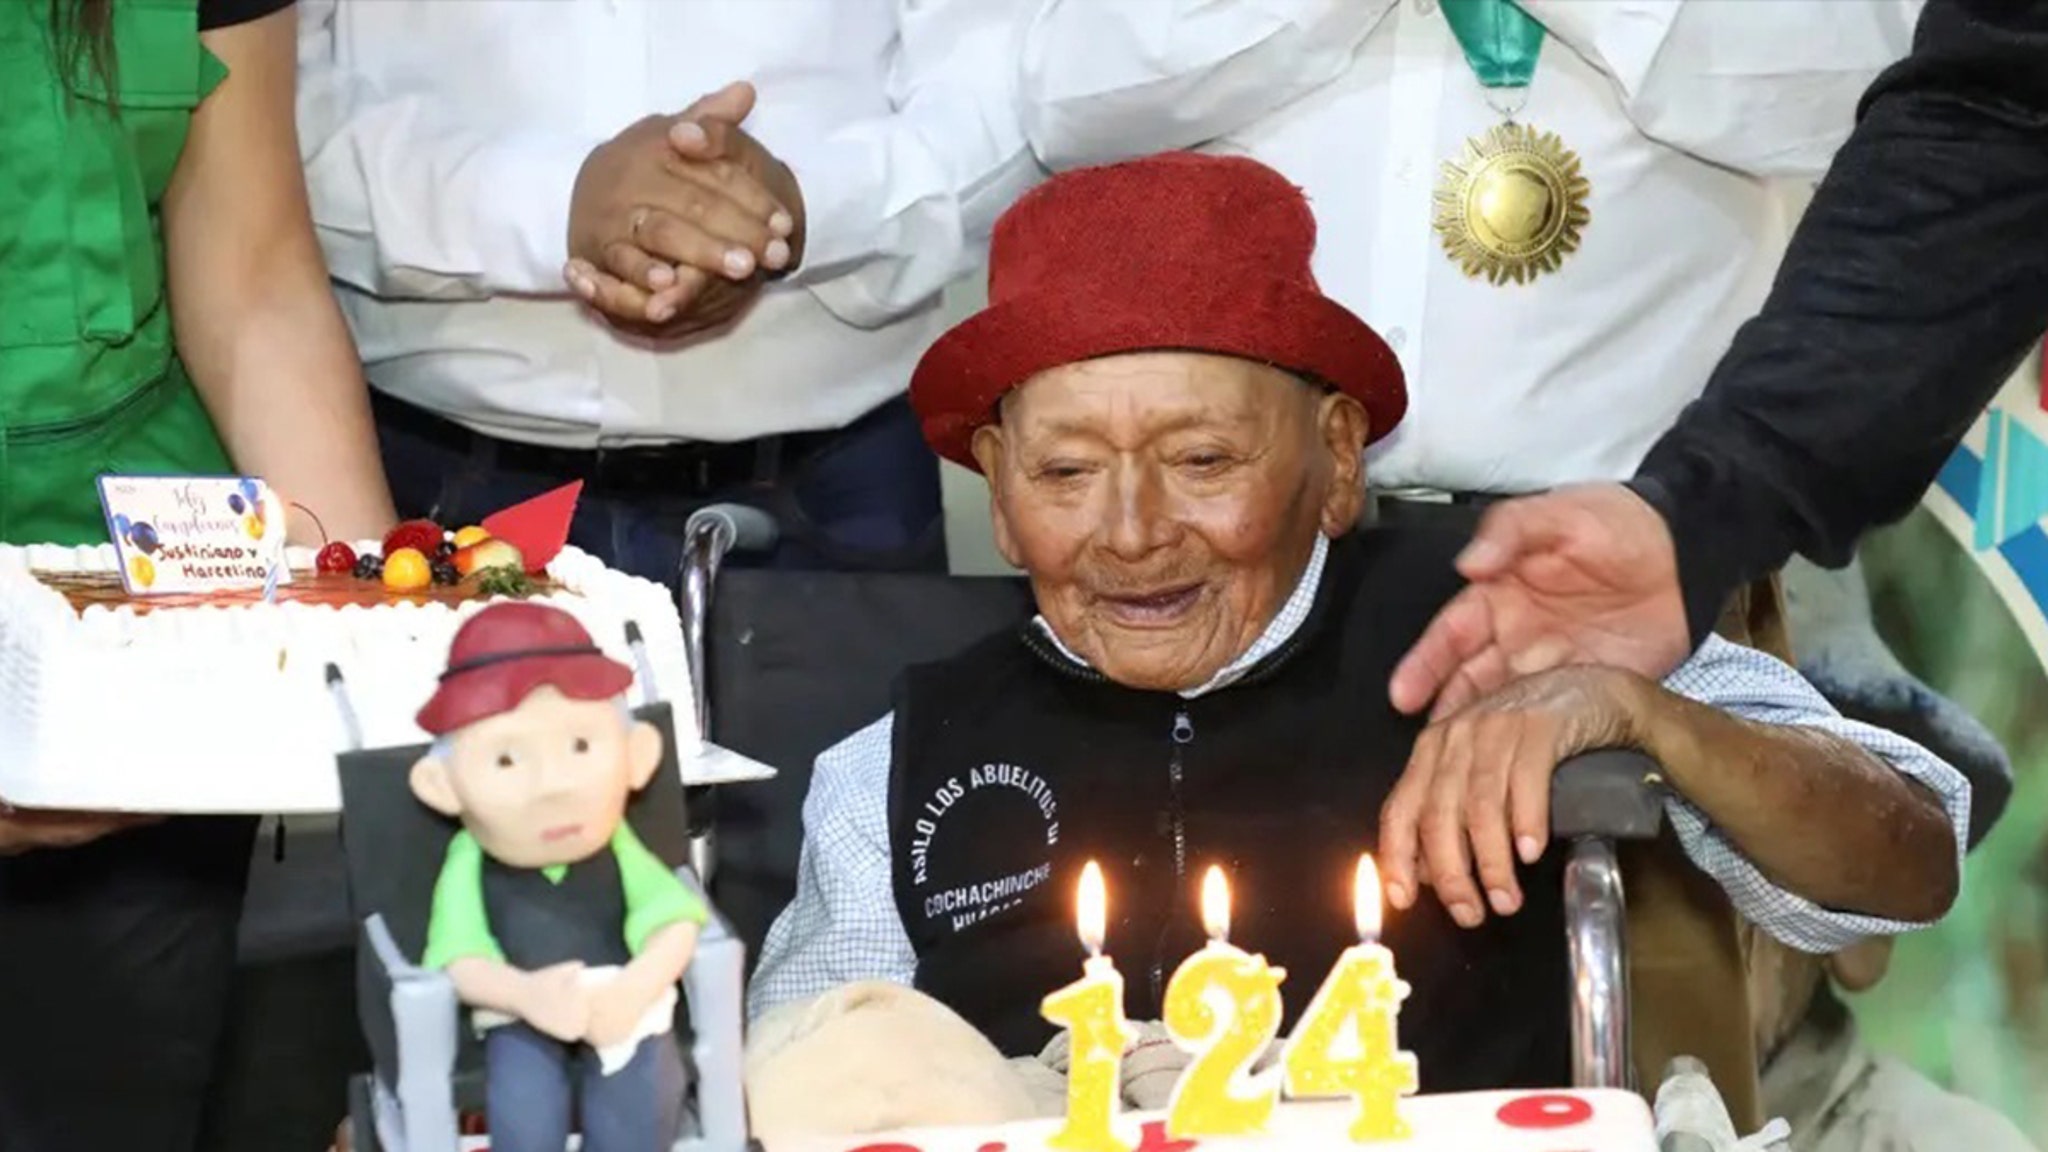 Peru Says World’s Oldest Man is Local Farmer at 124, Not UK Man at 111